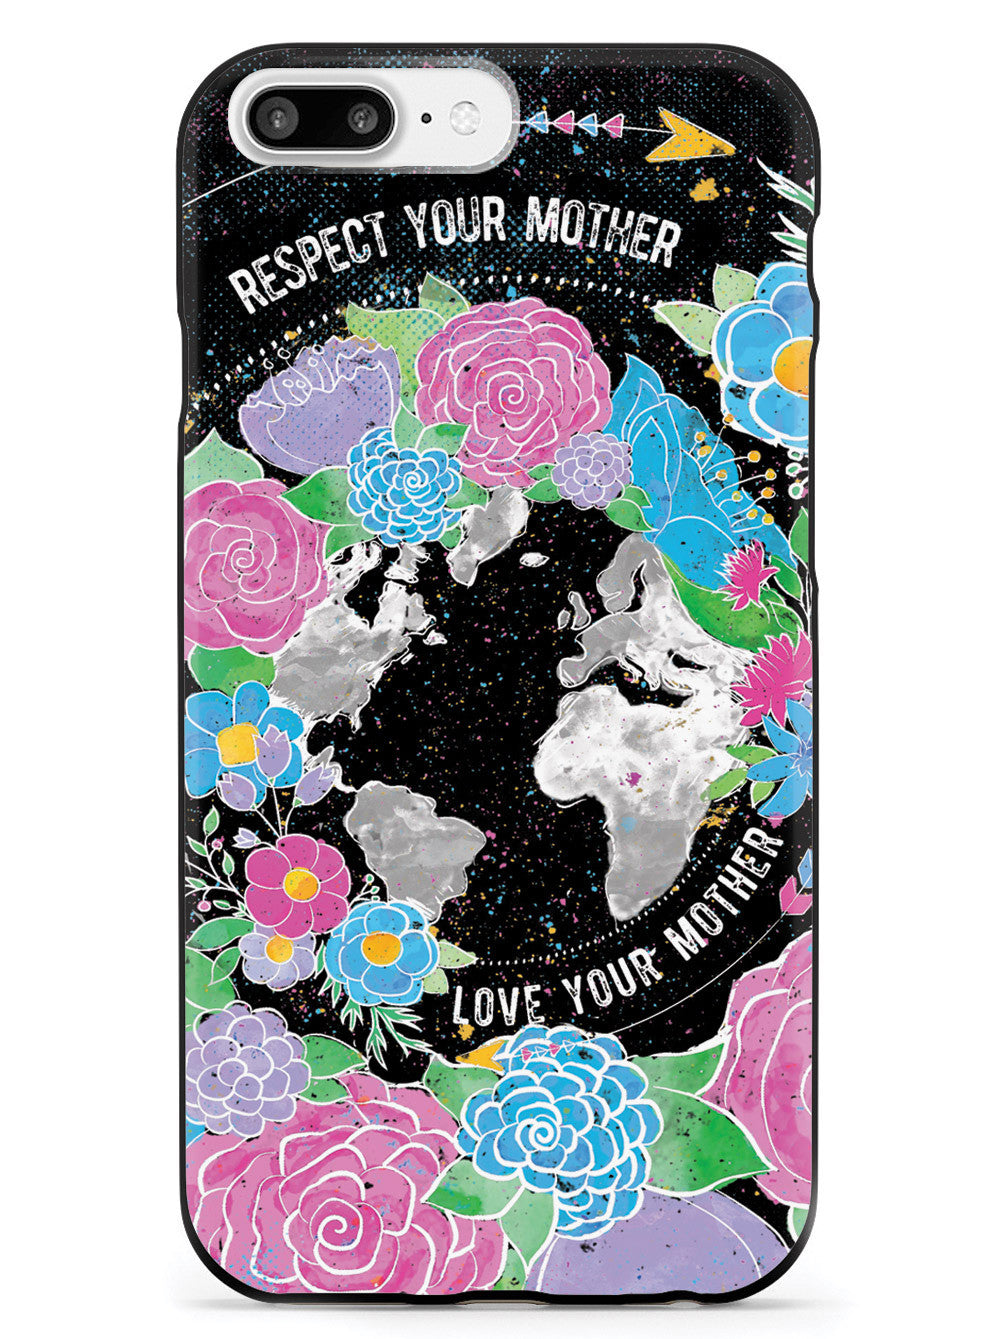 Respect & Love Your Mother - Earth Supporter - Black Case